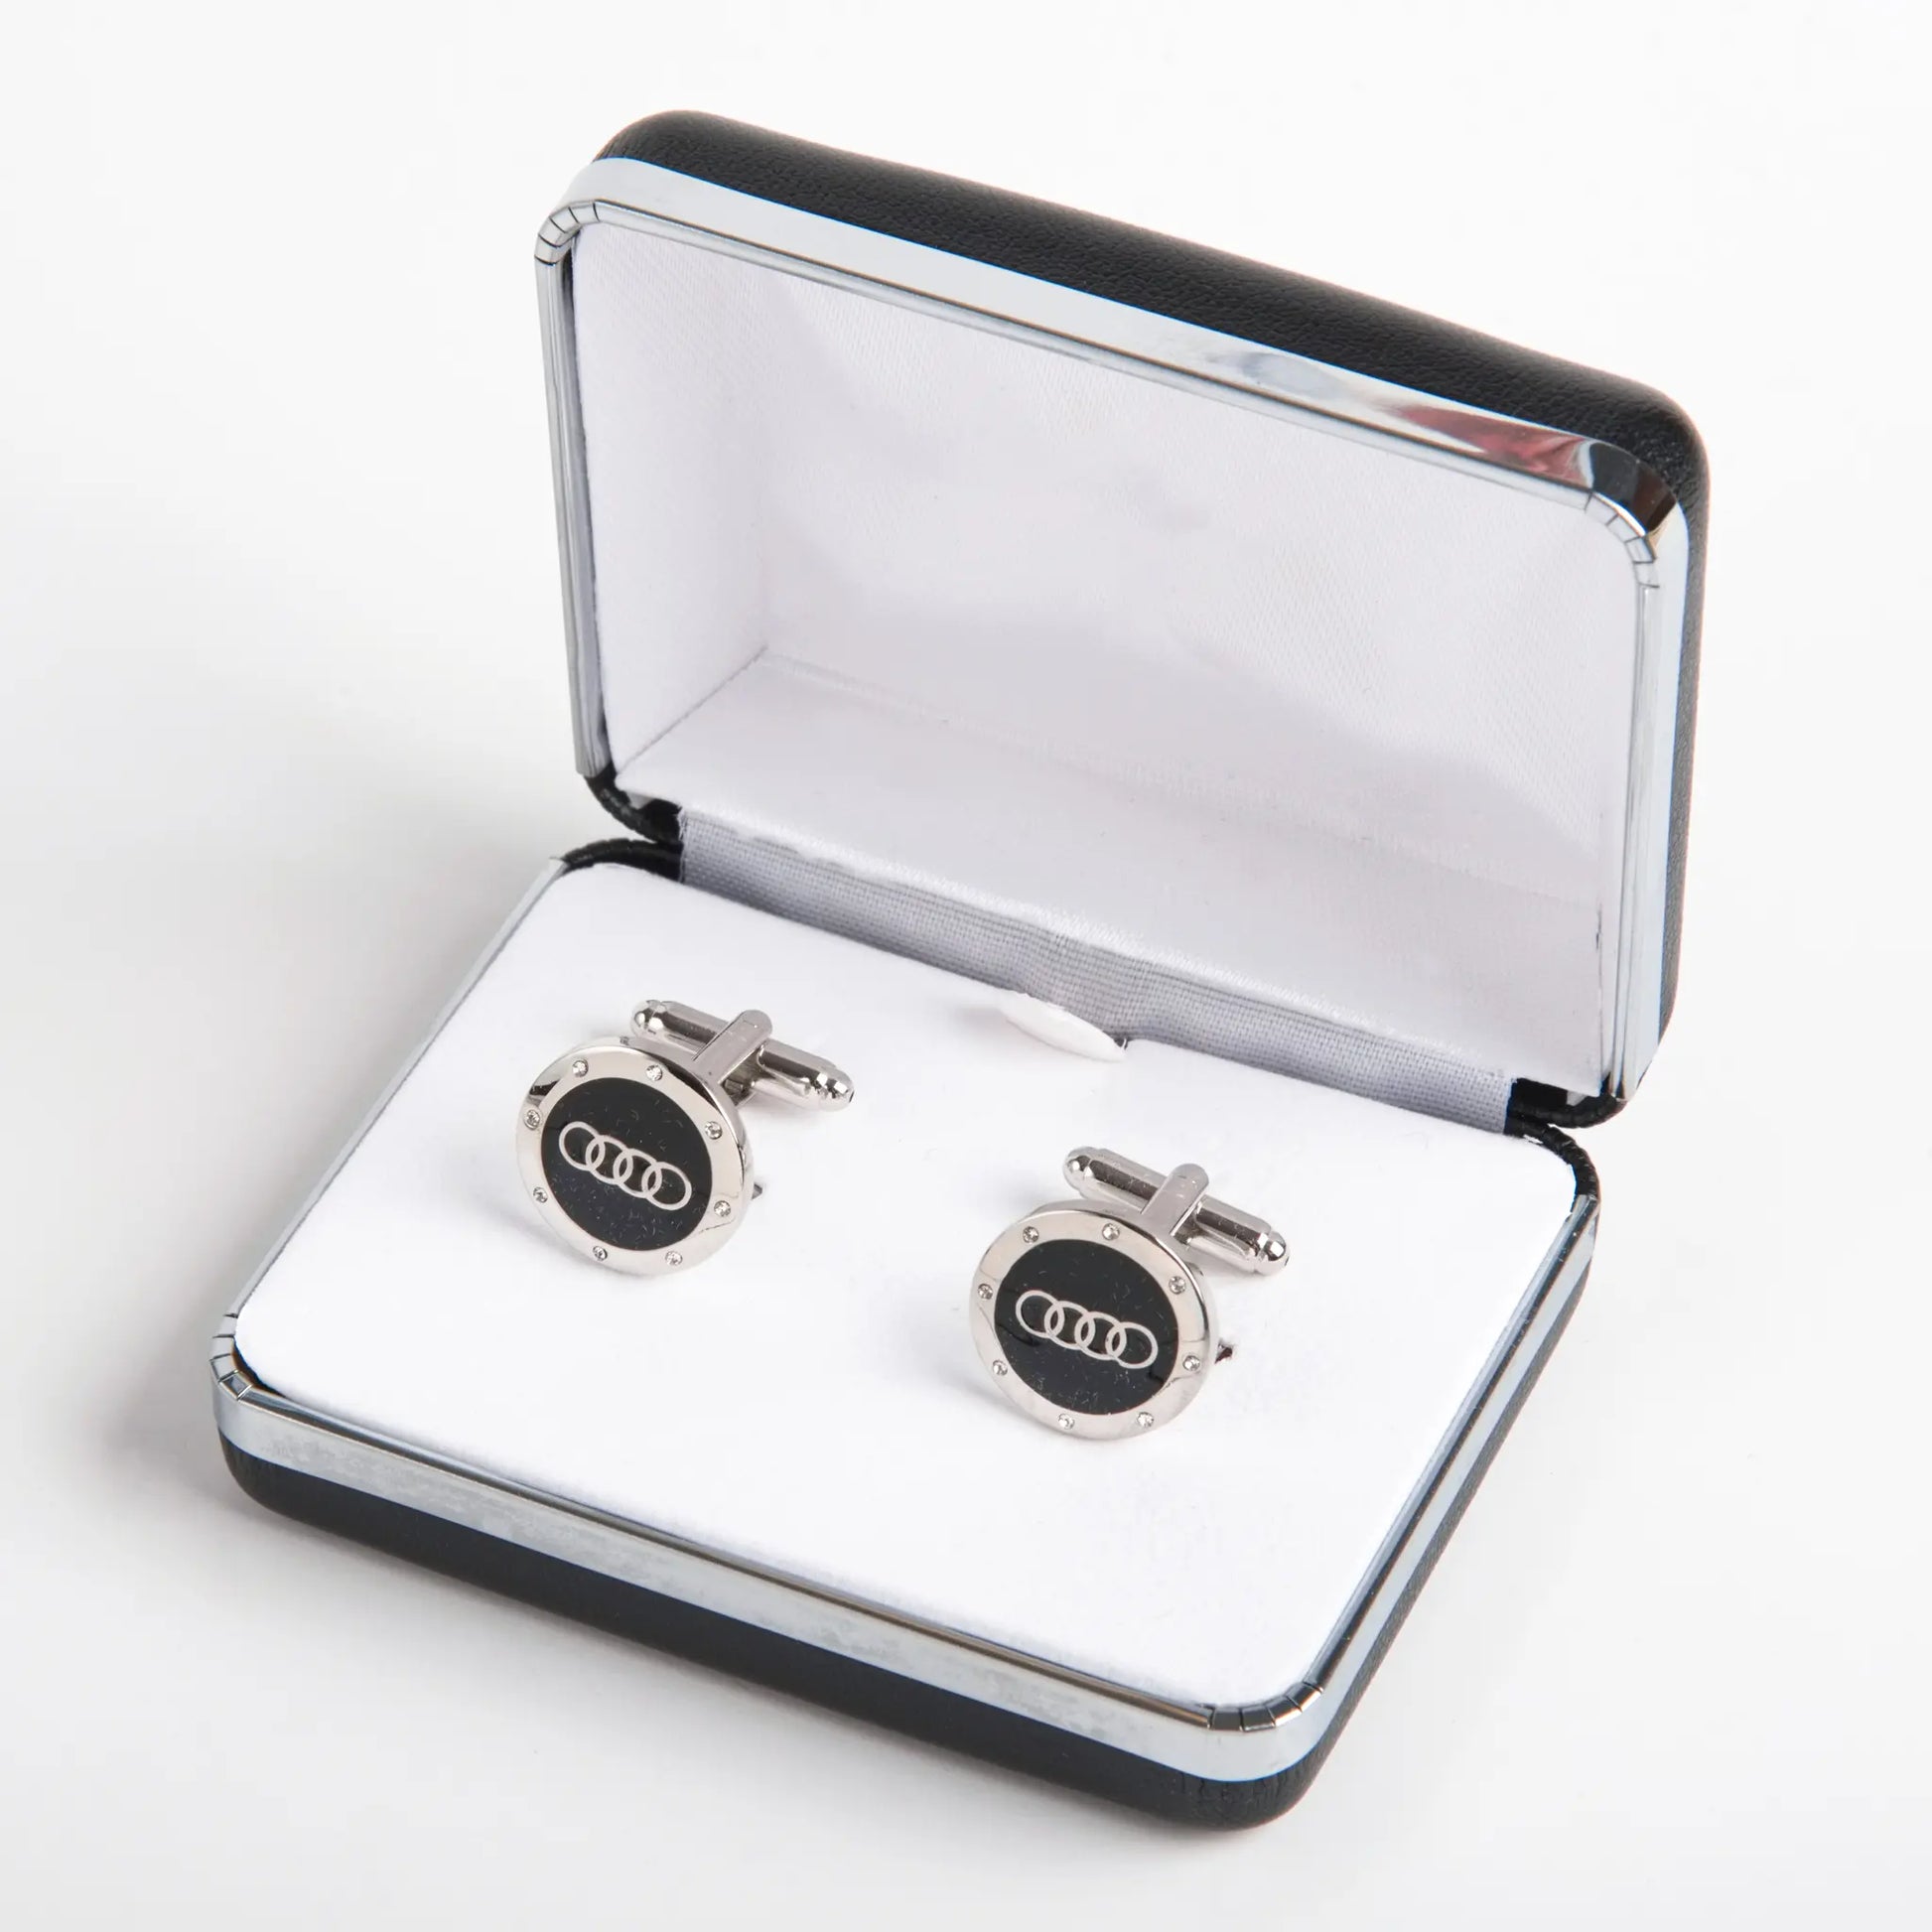 Audi Cuff Link - Larimars Clothing Men's Formal and casual wear shirts